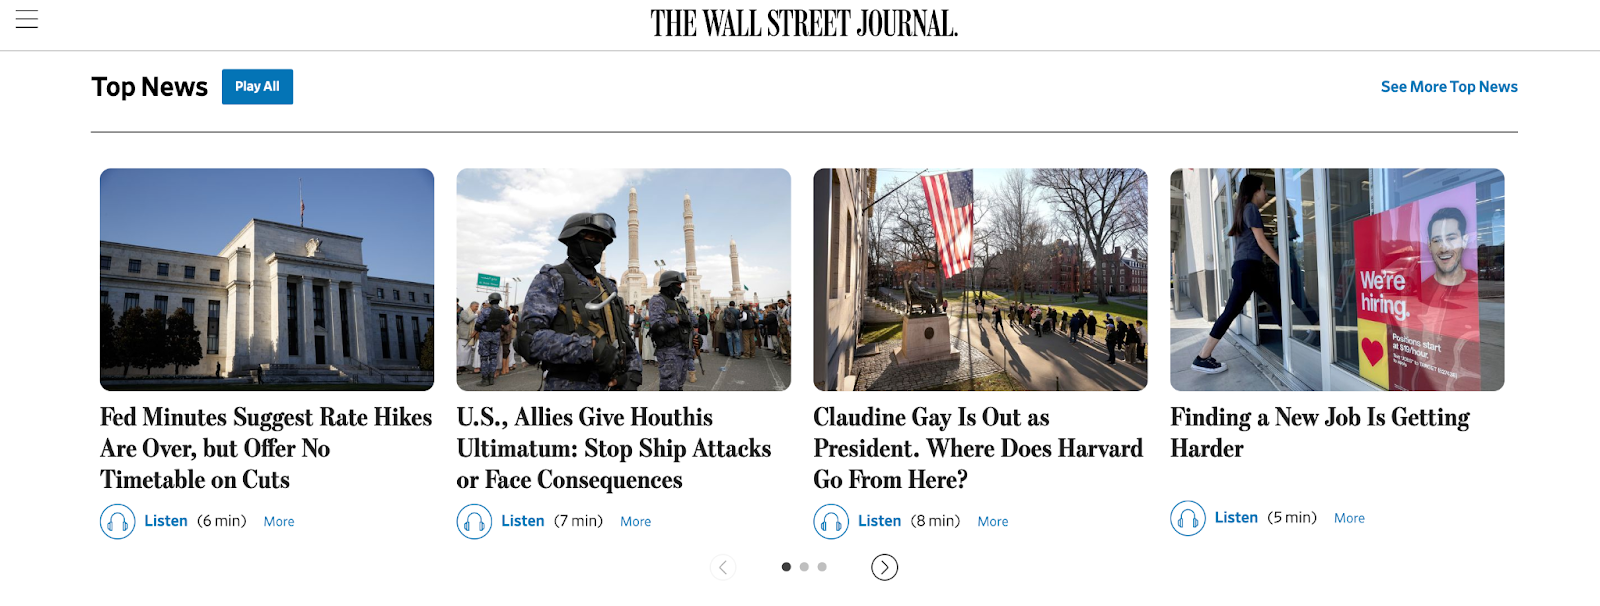 WordPress multisite example, The Wall Street Journal